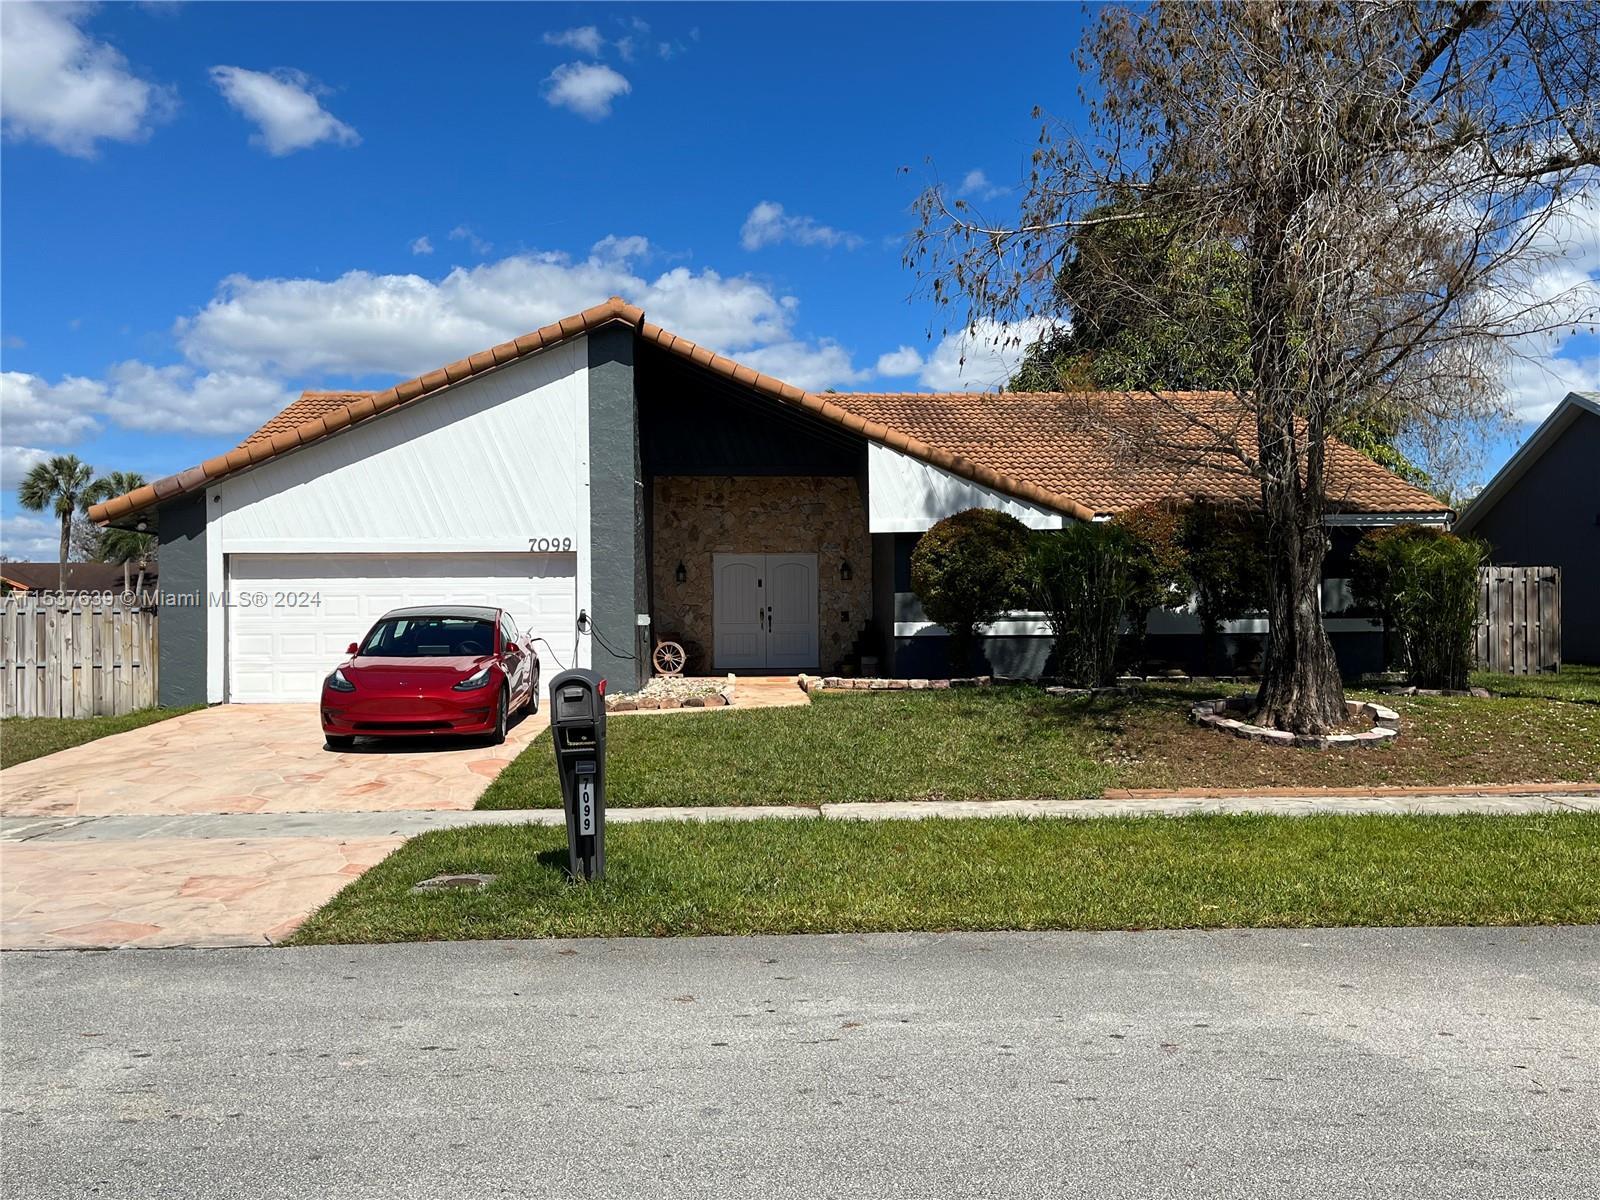 Photo of 7099 NW 48th Ct in Lauderhill, FL